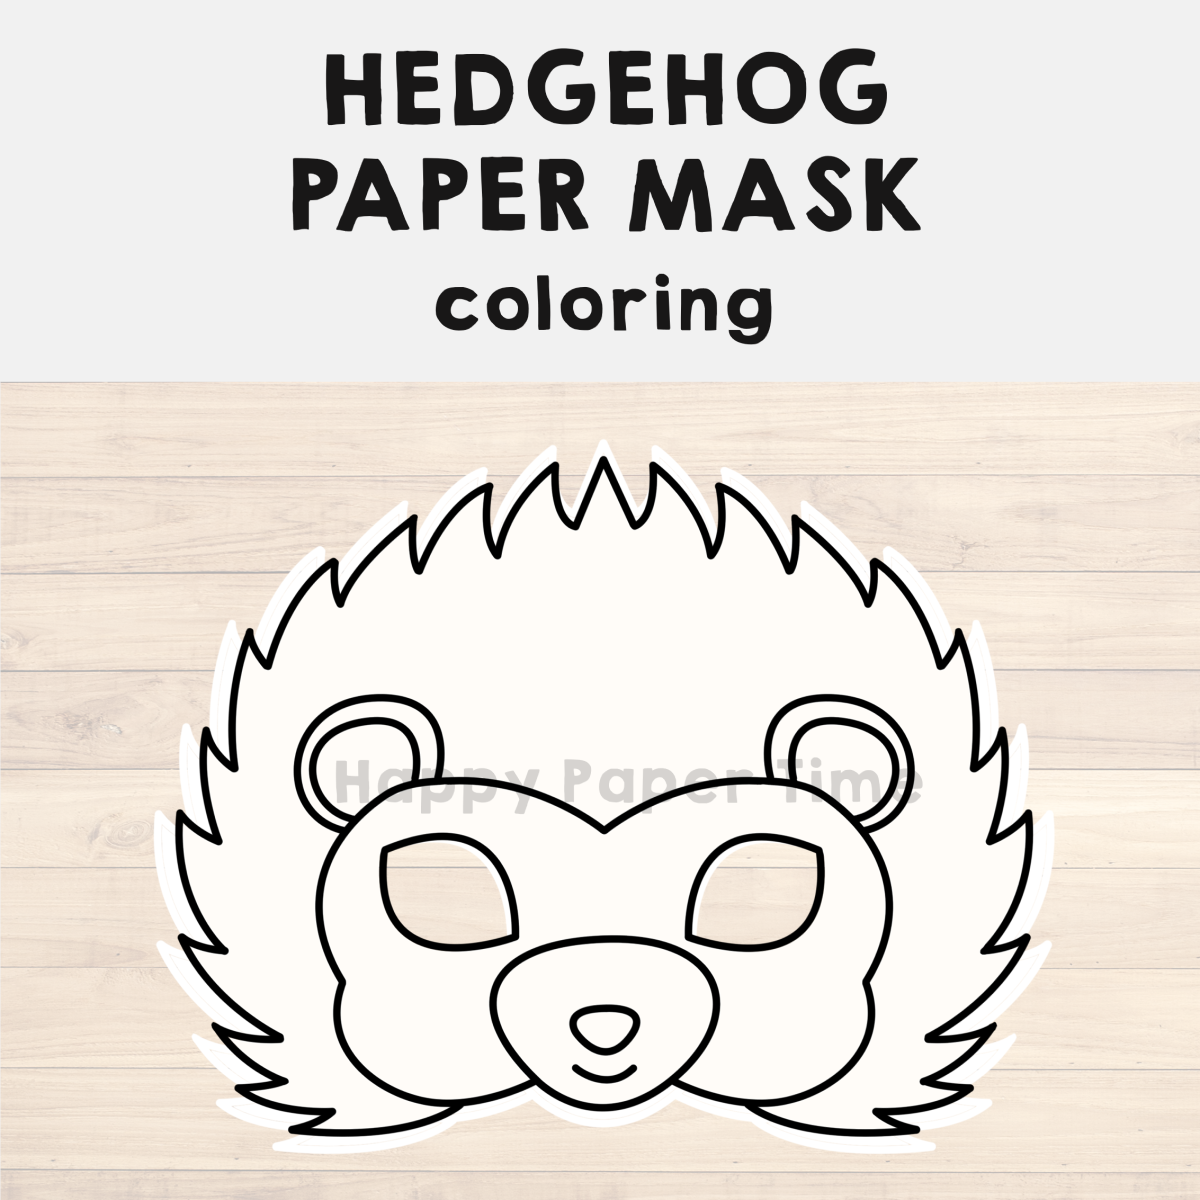 Hedgehog paper mask printable woodland forest animal coloring craft activity made by teachers